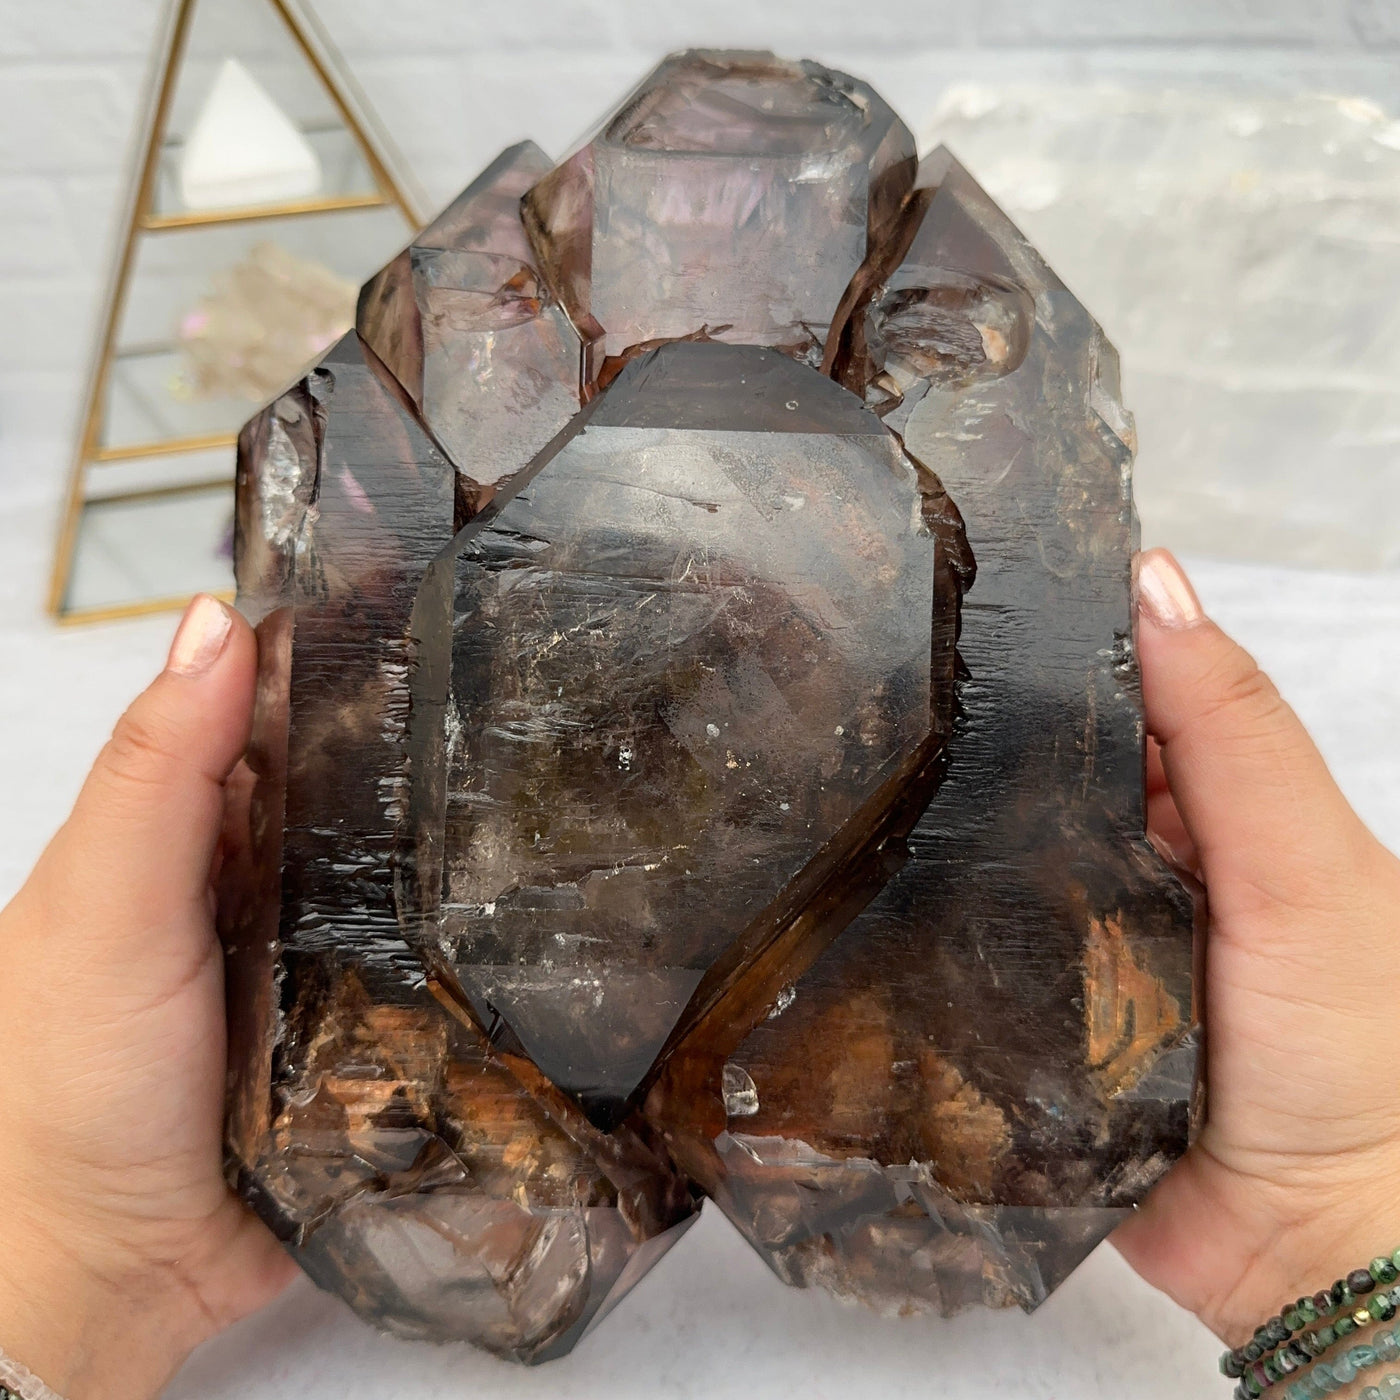 Elestial Alligator Smokey Quartz Crystal in hands for size reference 